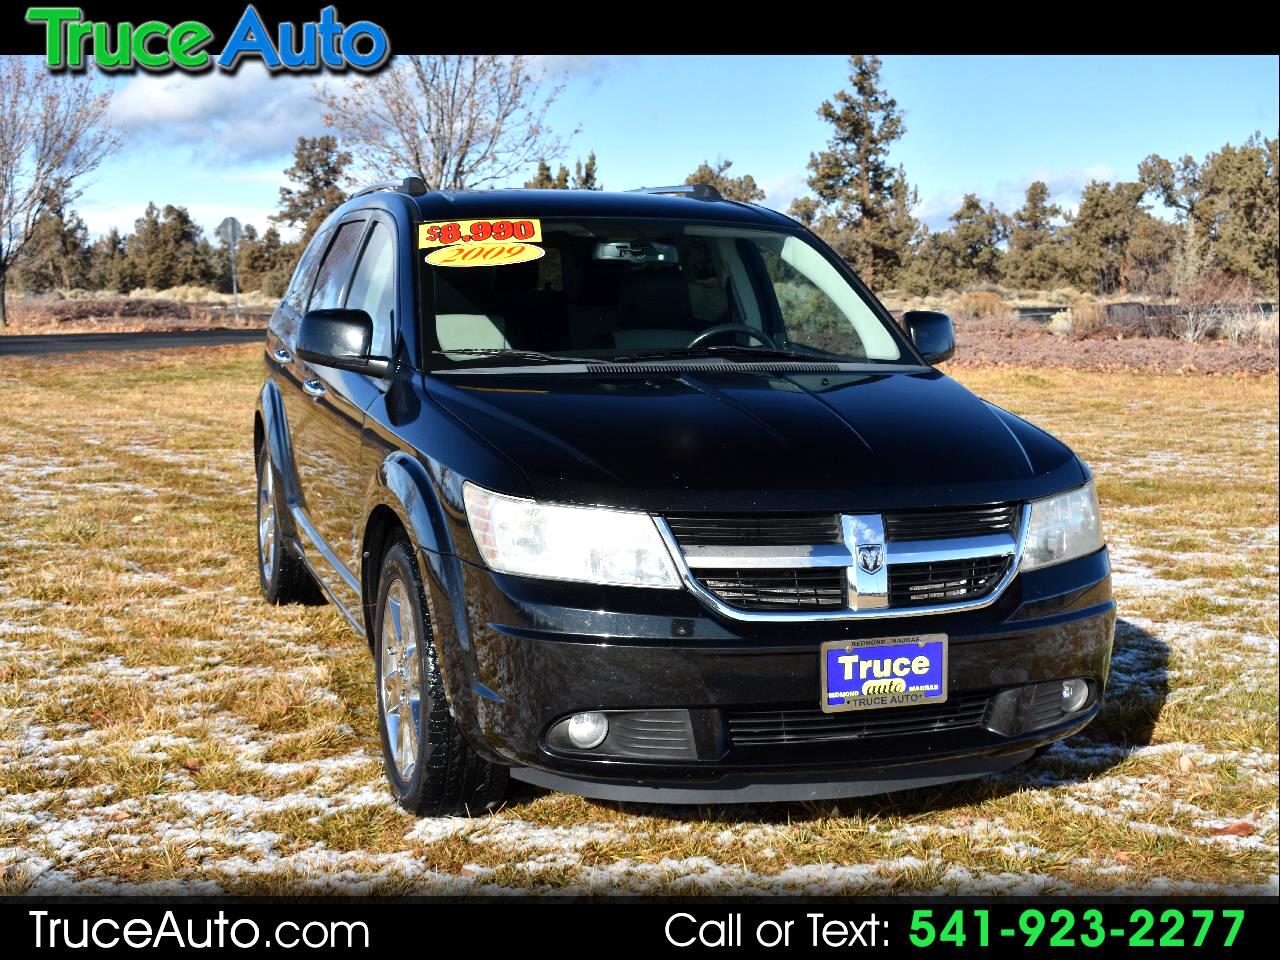 Used 2009 Dodge Journey Awd 4dr Rt Third Row For Sale In Redmond